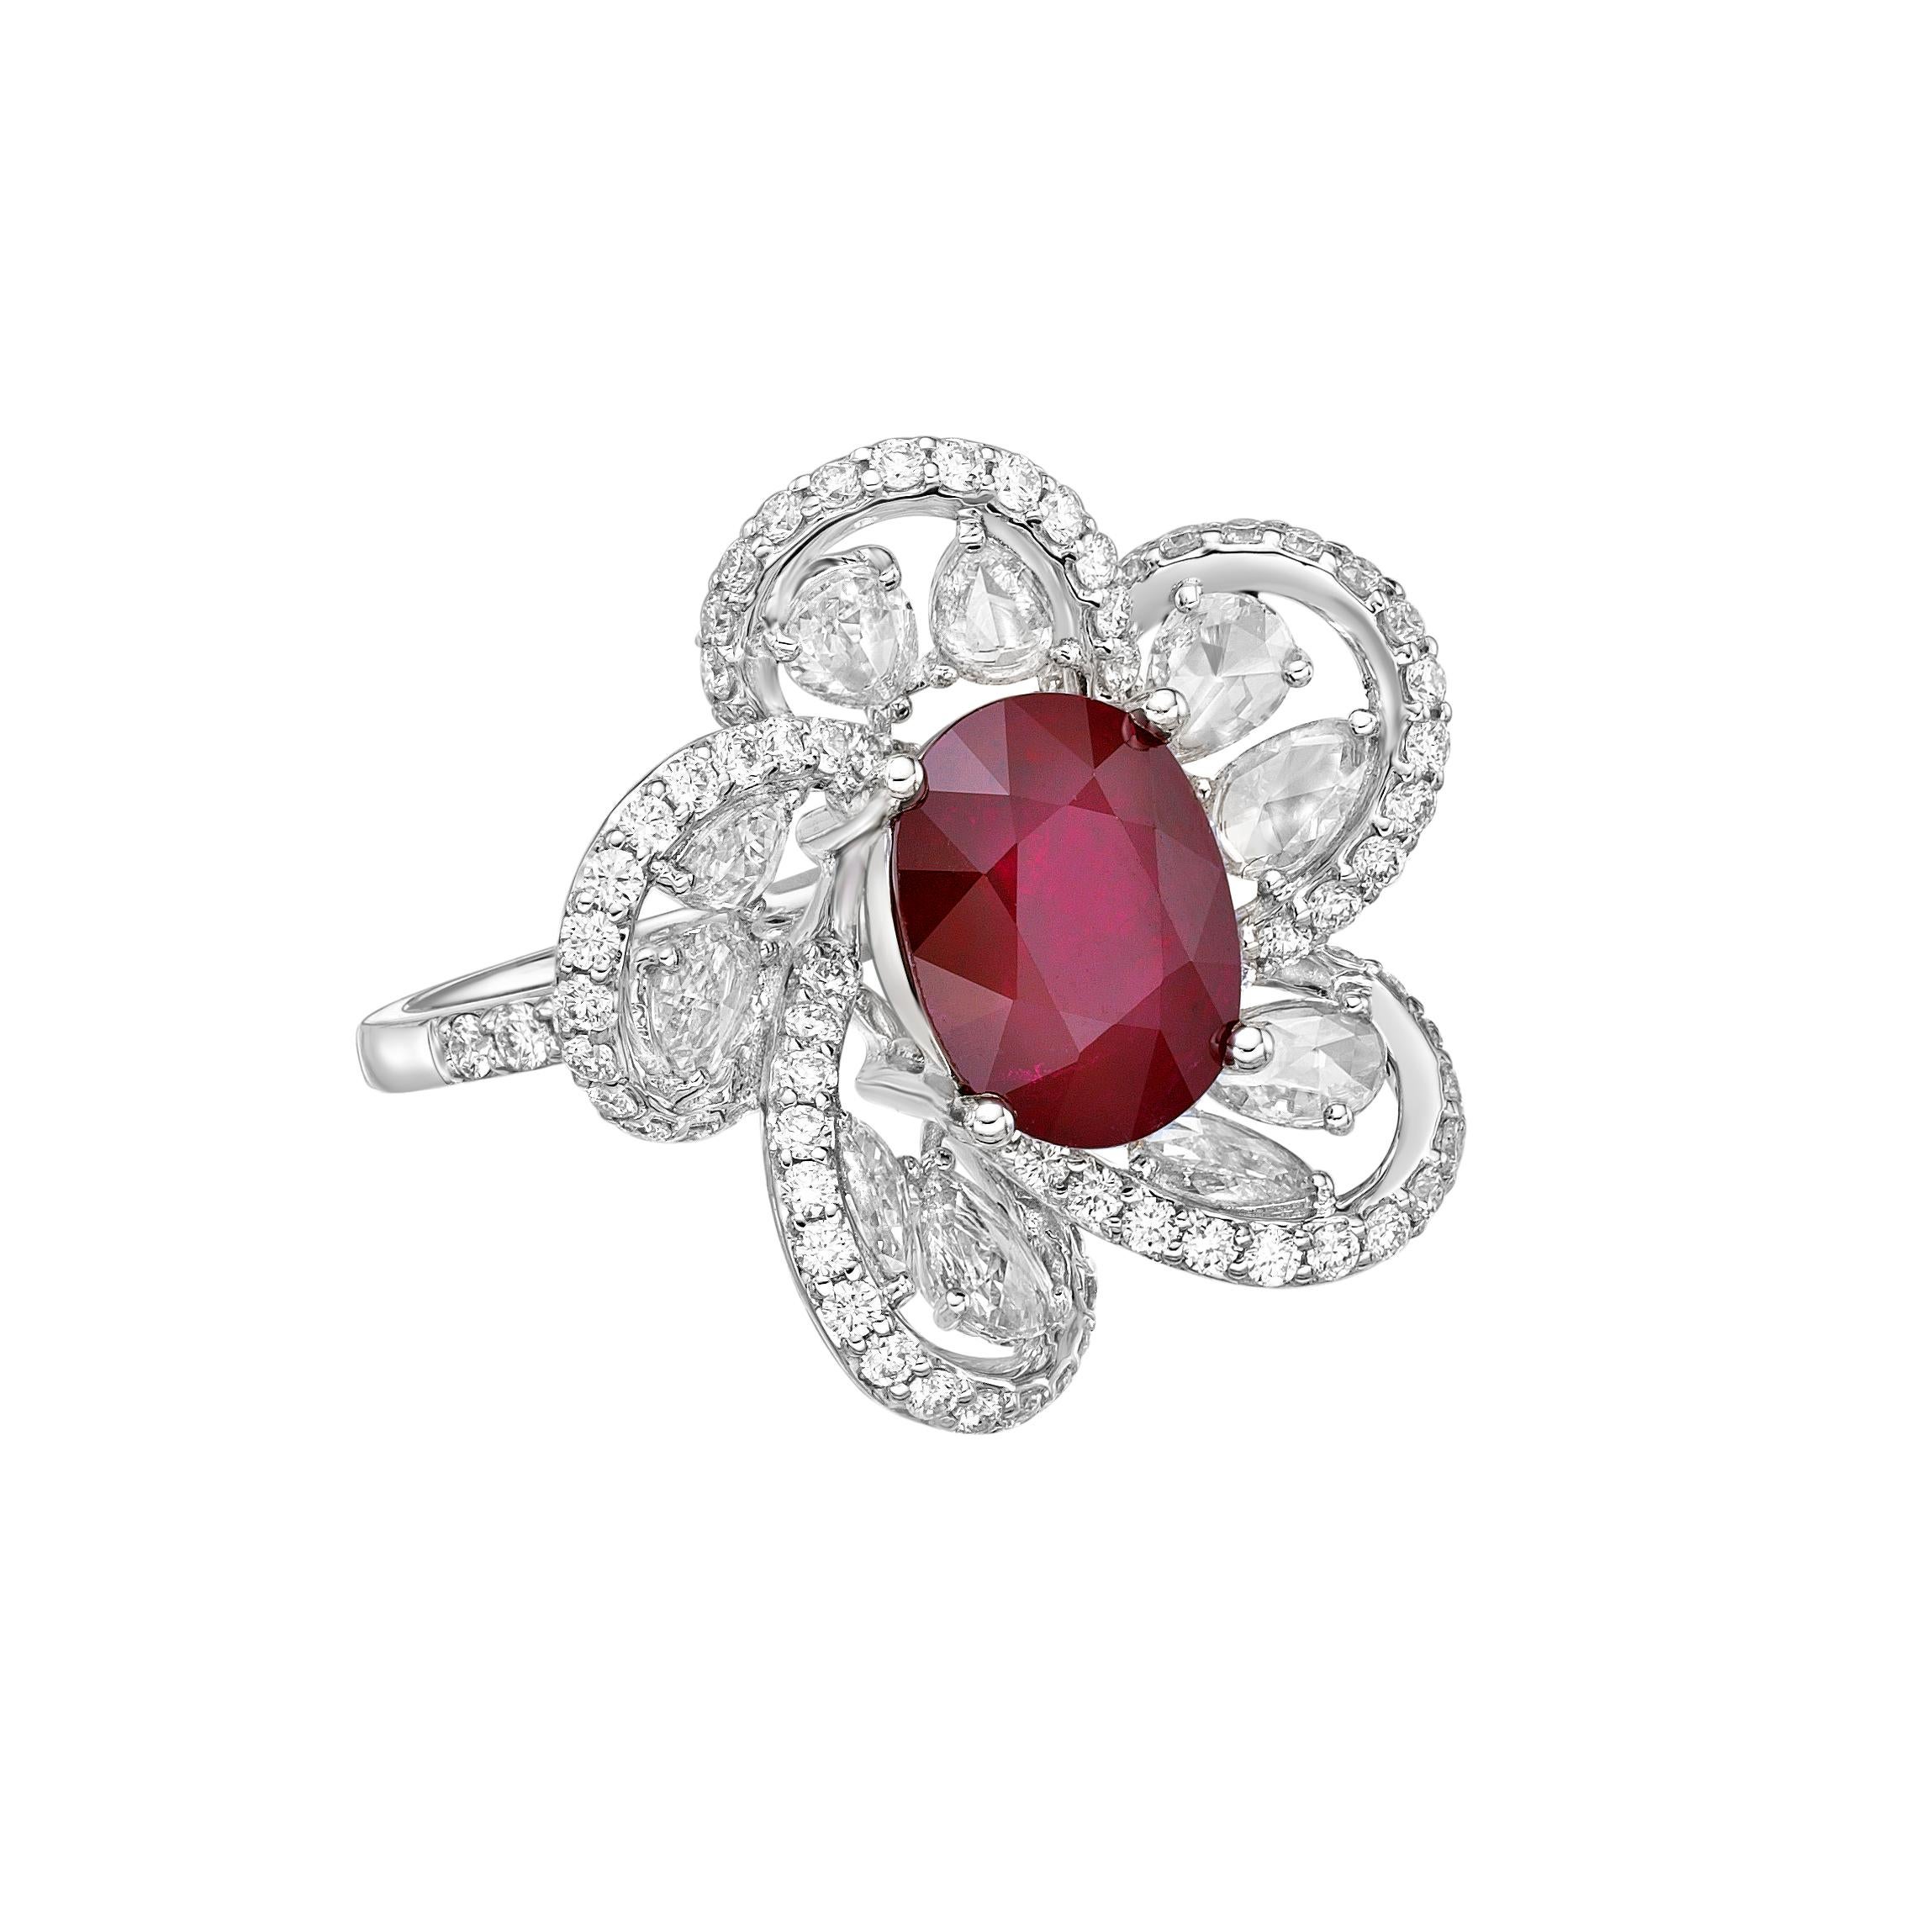 Oval Cut GRS Certified 3.29 Carat Ruby and Diamond Ring in 18 Karat White Gold For Sale